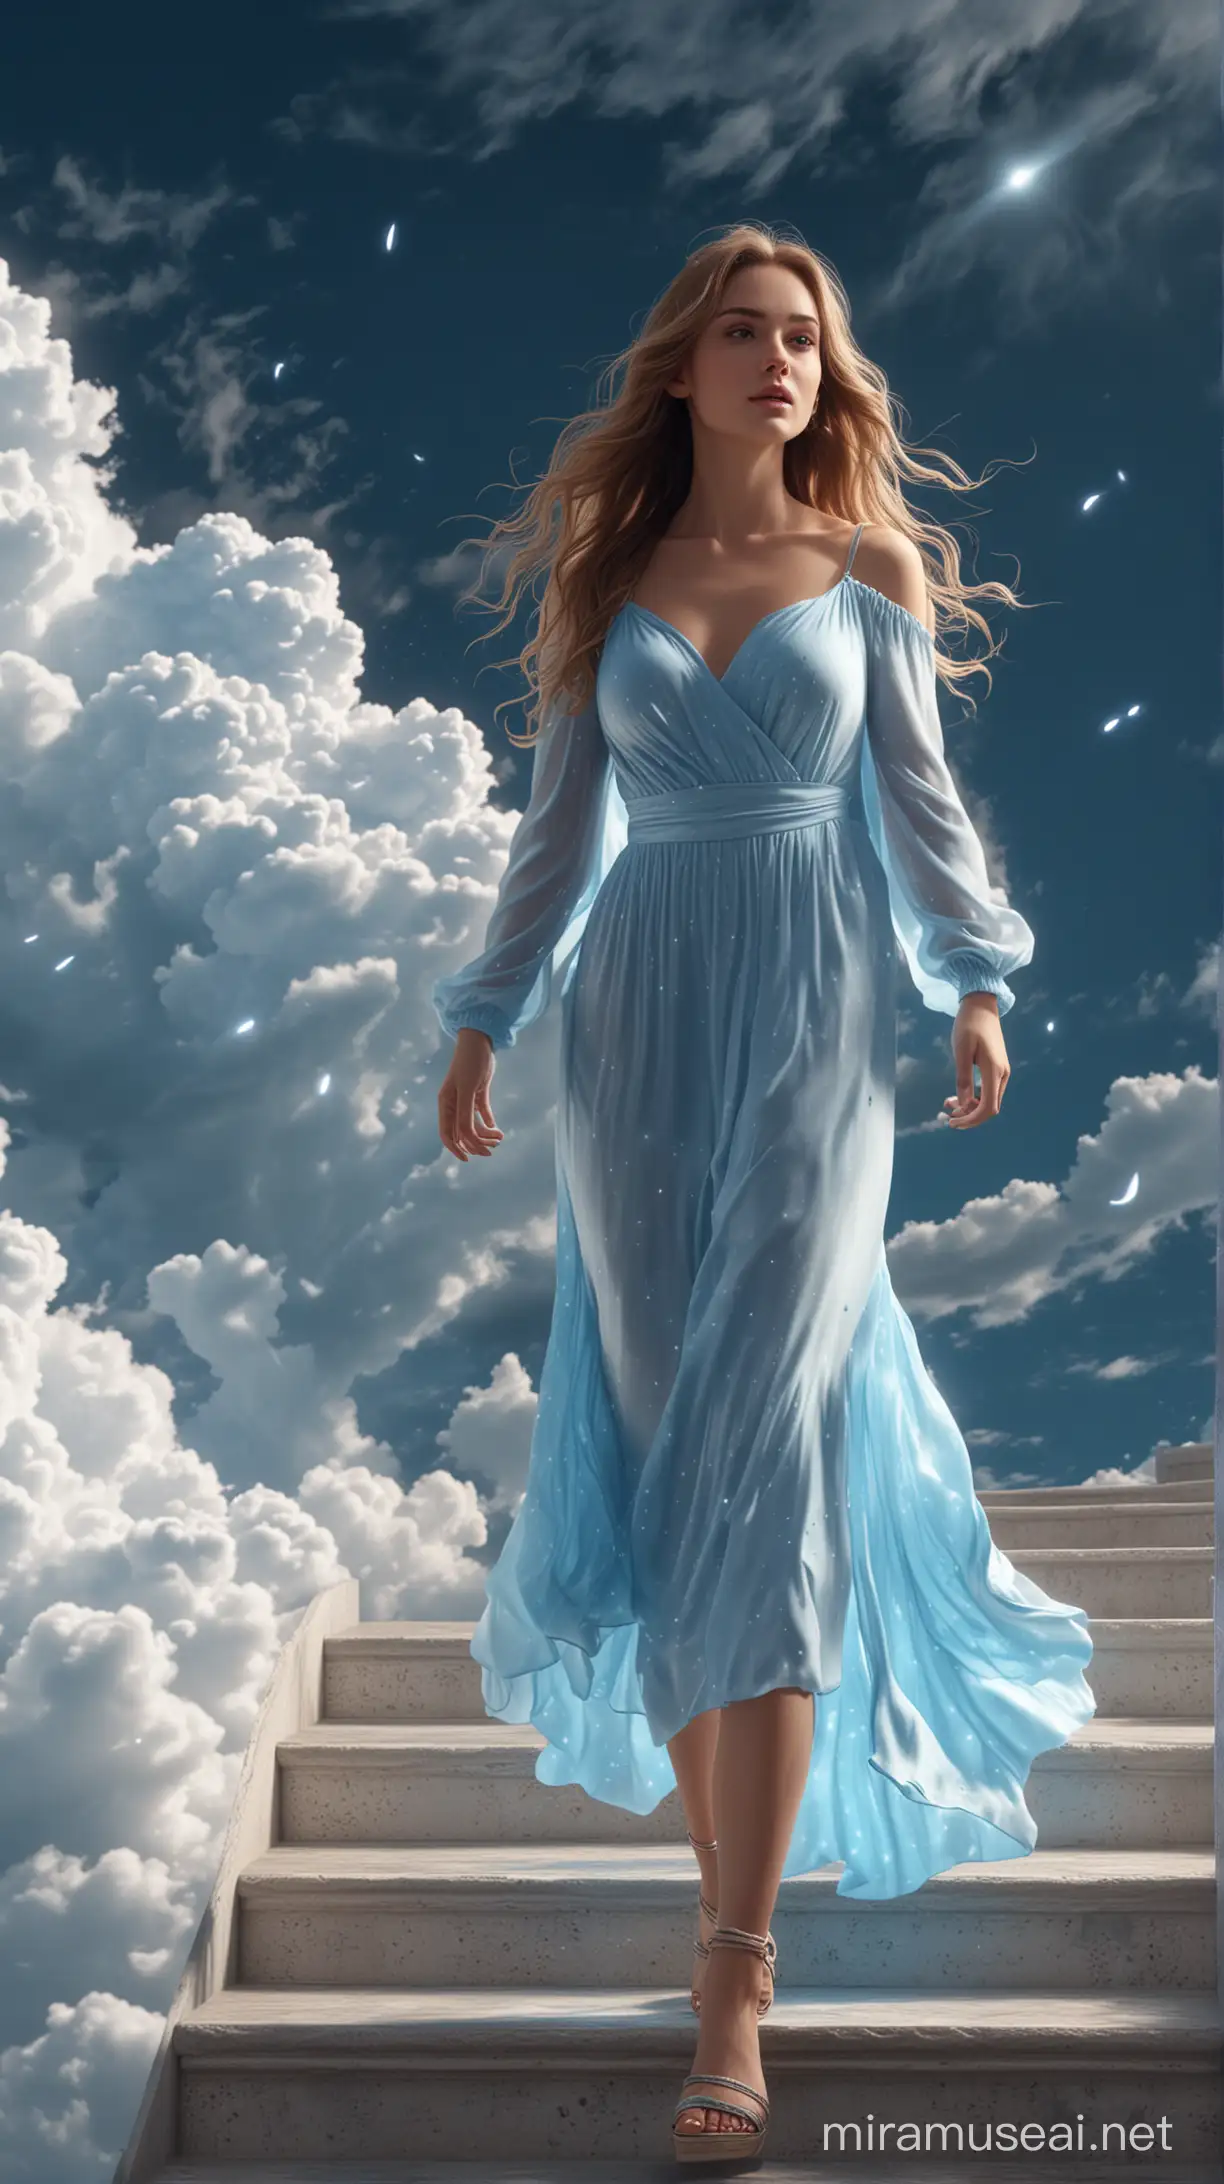 3D 8k minimal realistic illustrator minimal beauty woman with long hair walking on the stairs up to the clouds shinning and glittering with her blue light dress 